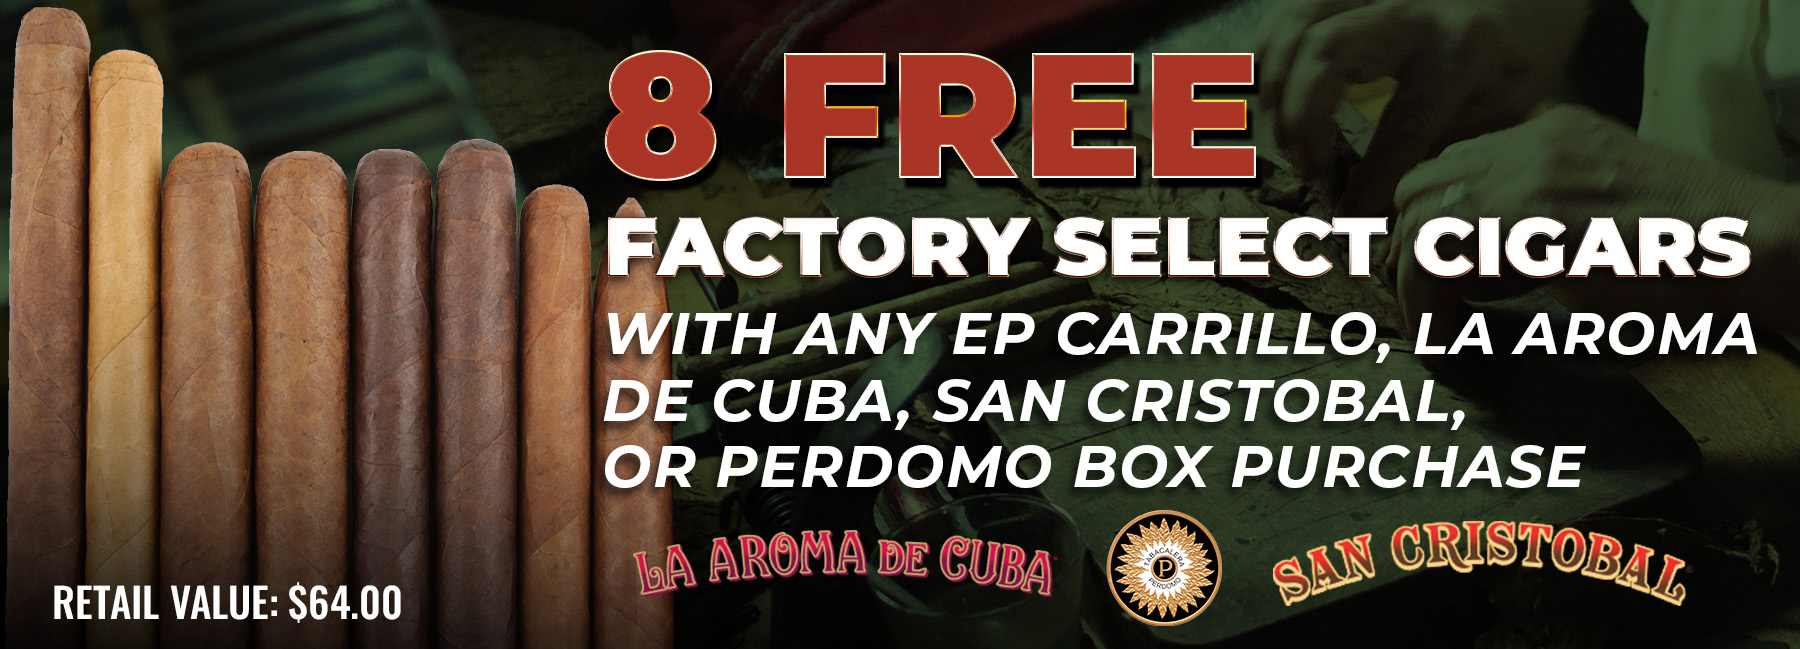 8 Free Factory Select Cigars